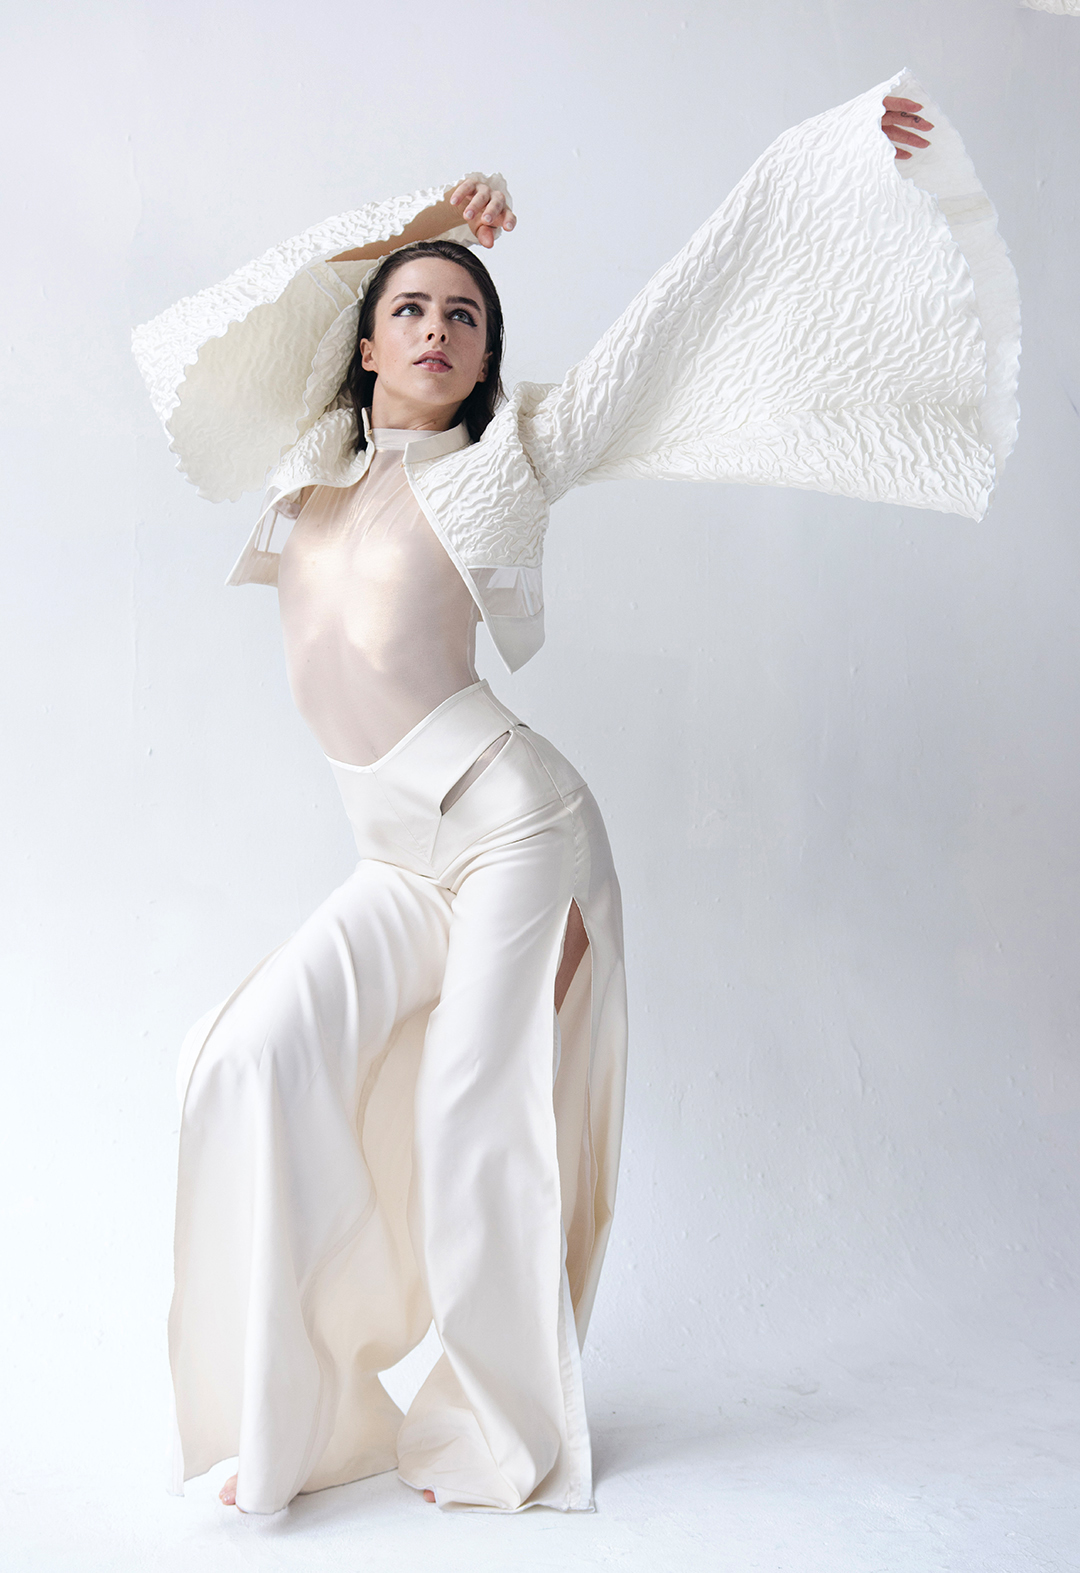 This is a photo of a model wearing a seashell white matelassé organza kimono sleeve jacket, and cut-out silk satin flared pants. She has both of her hands diagonally up towards the right side of the photo. Her knees are bent and her hip is out towards the right. 